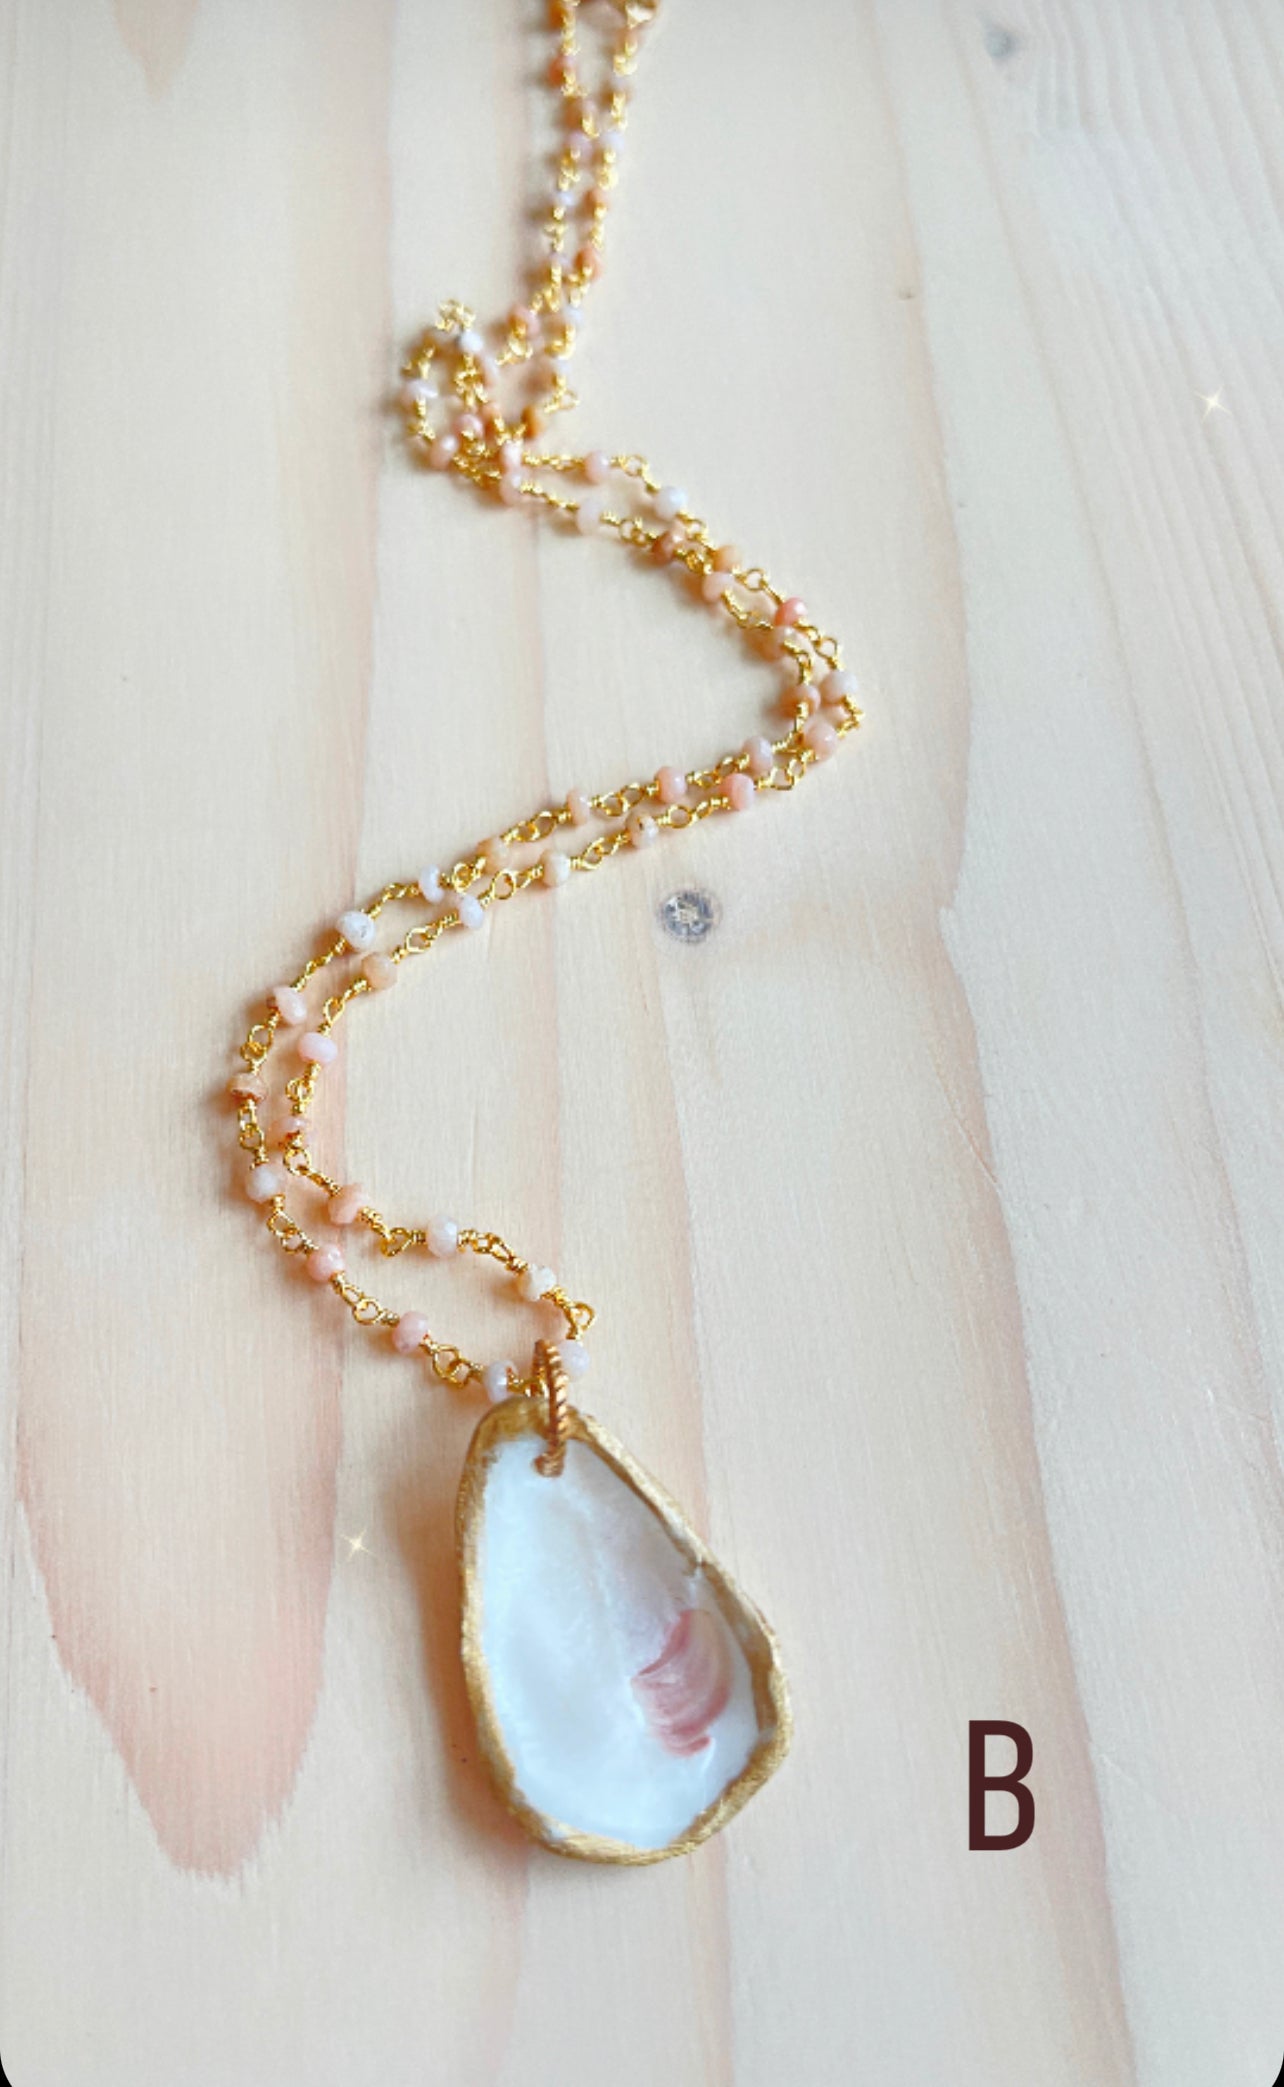 B.  Oyster shell with pink Opal gemstone beaded chain.